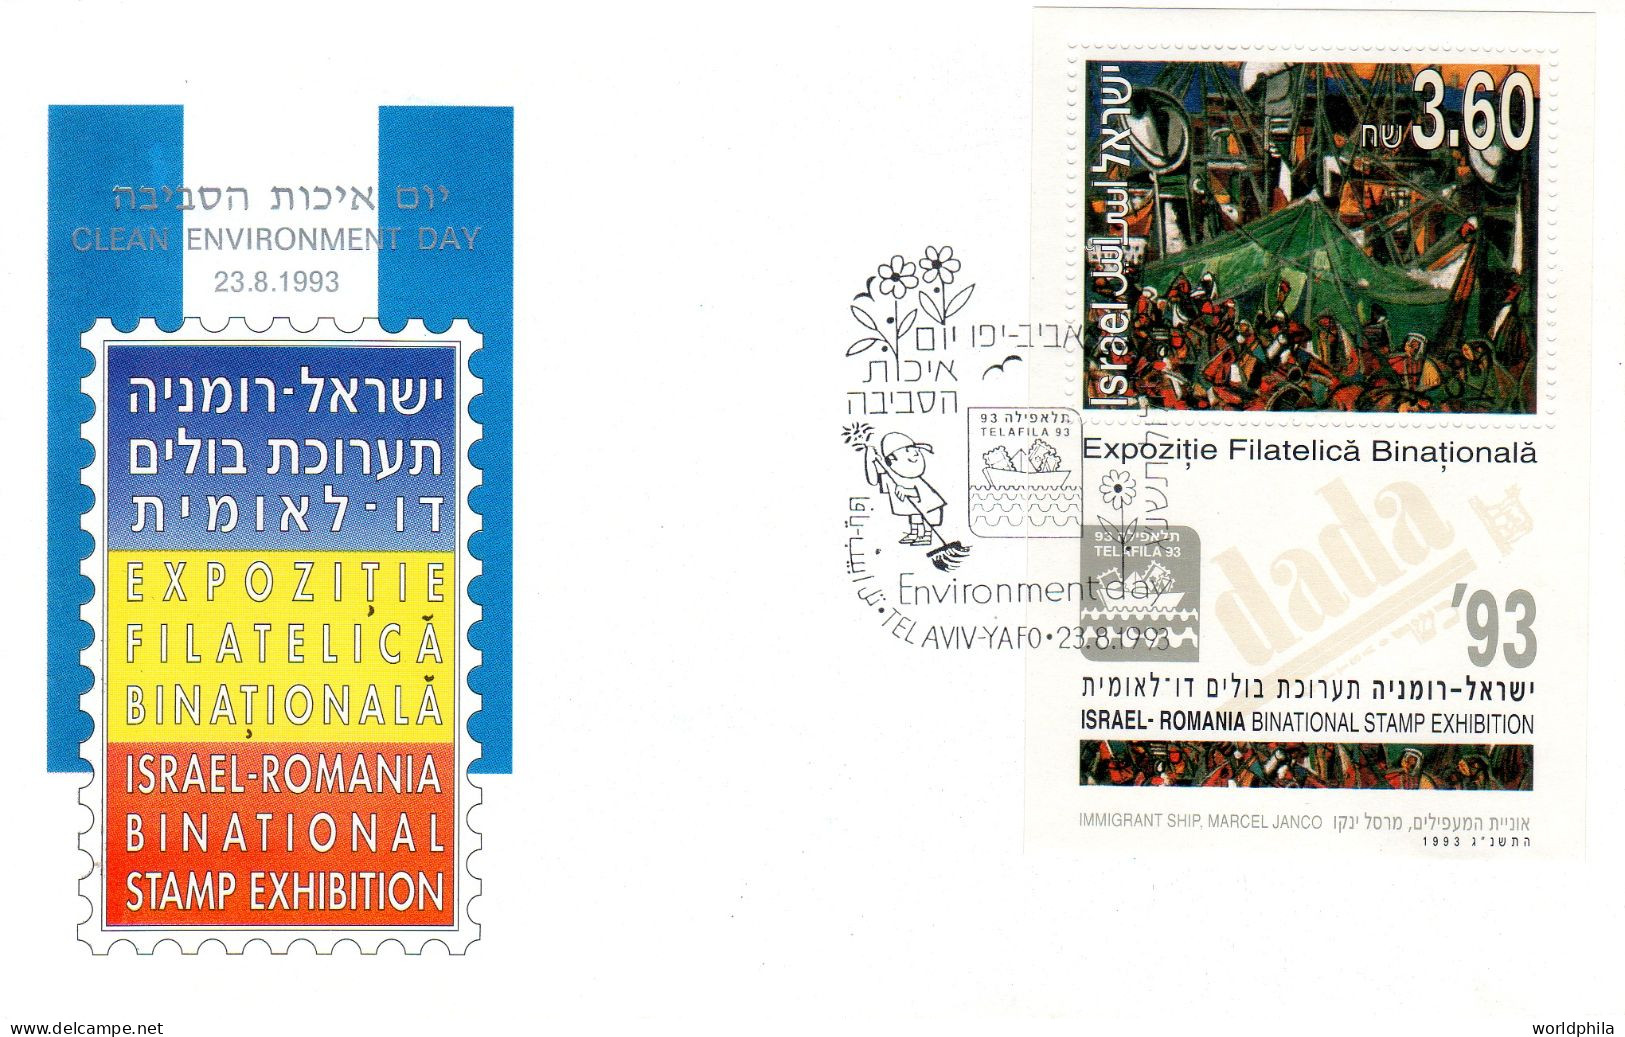 ISRAEL-Romania "Israel-Romania 93" BiNational Stamp Exhibition Cacheted Cover "Immigrant Ship" Souvenir Sheet - Covers & Documents